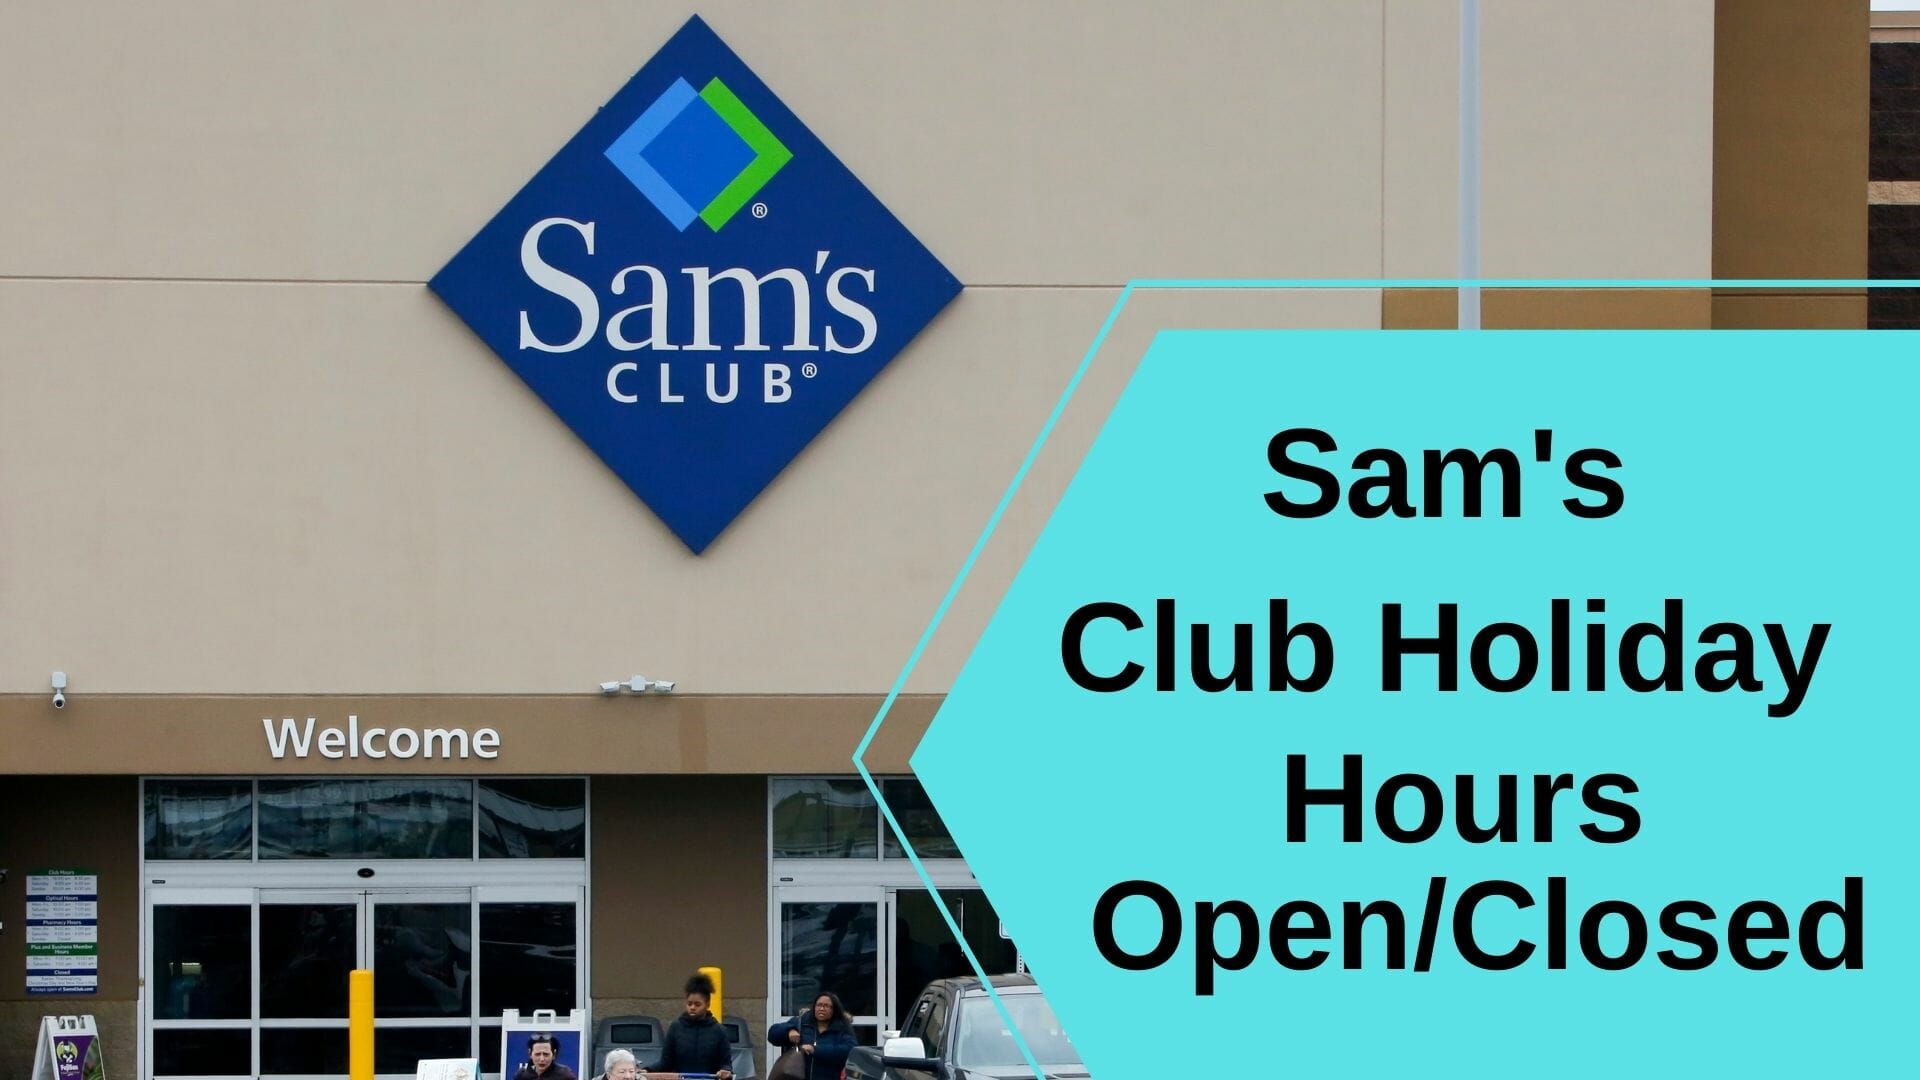 Sam's Club Holiday Hours Open/Closed